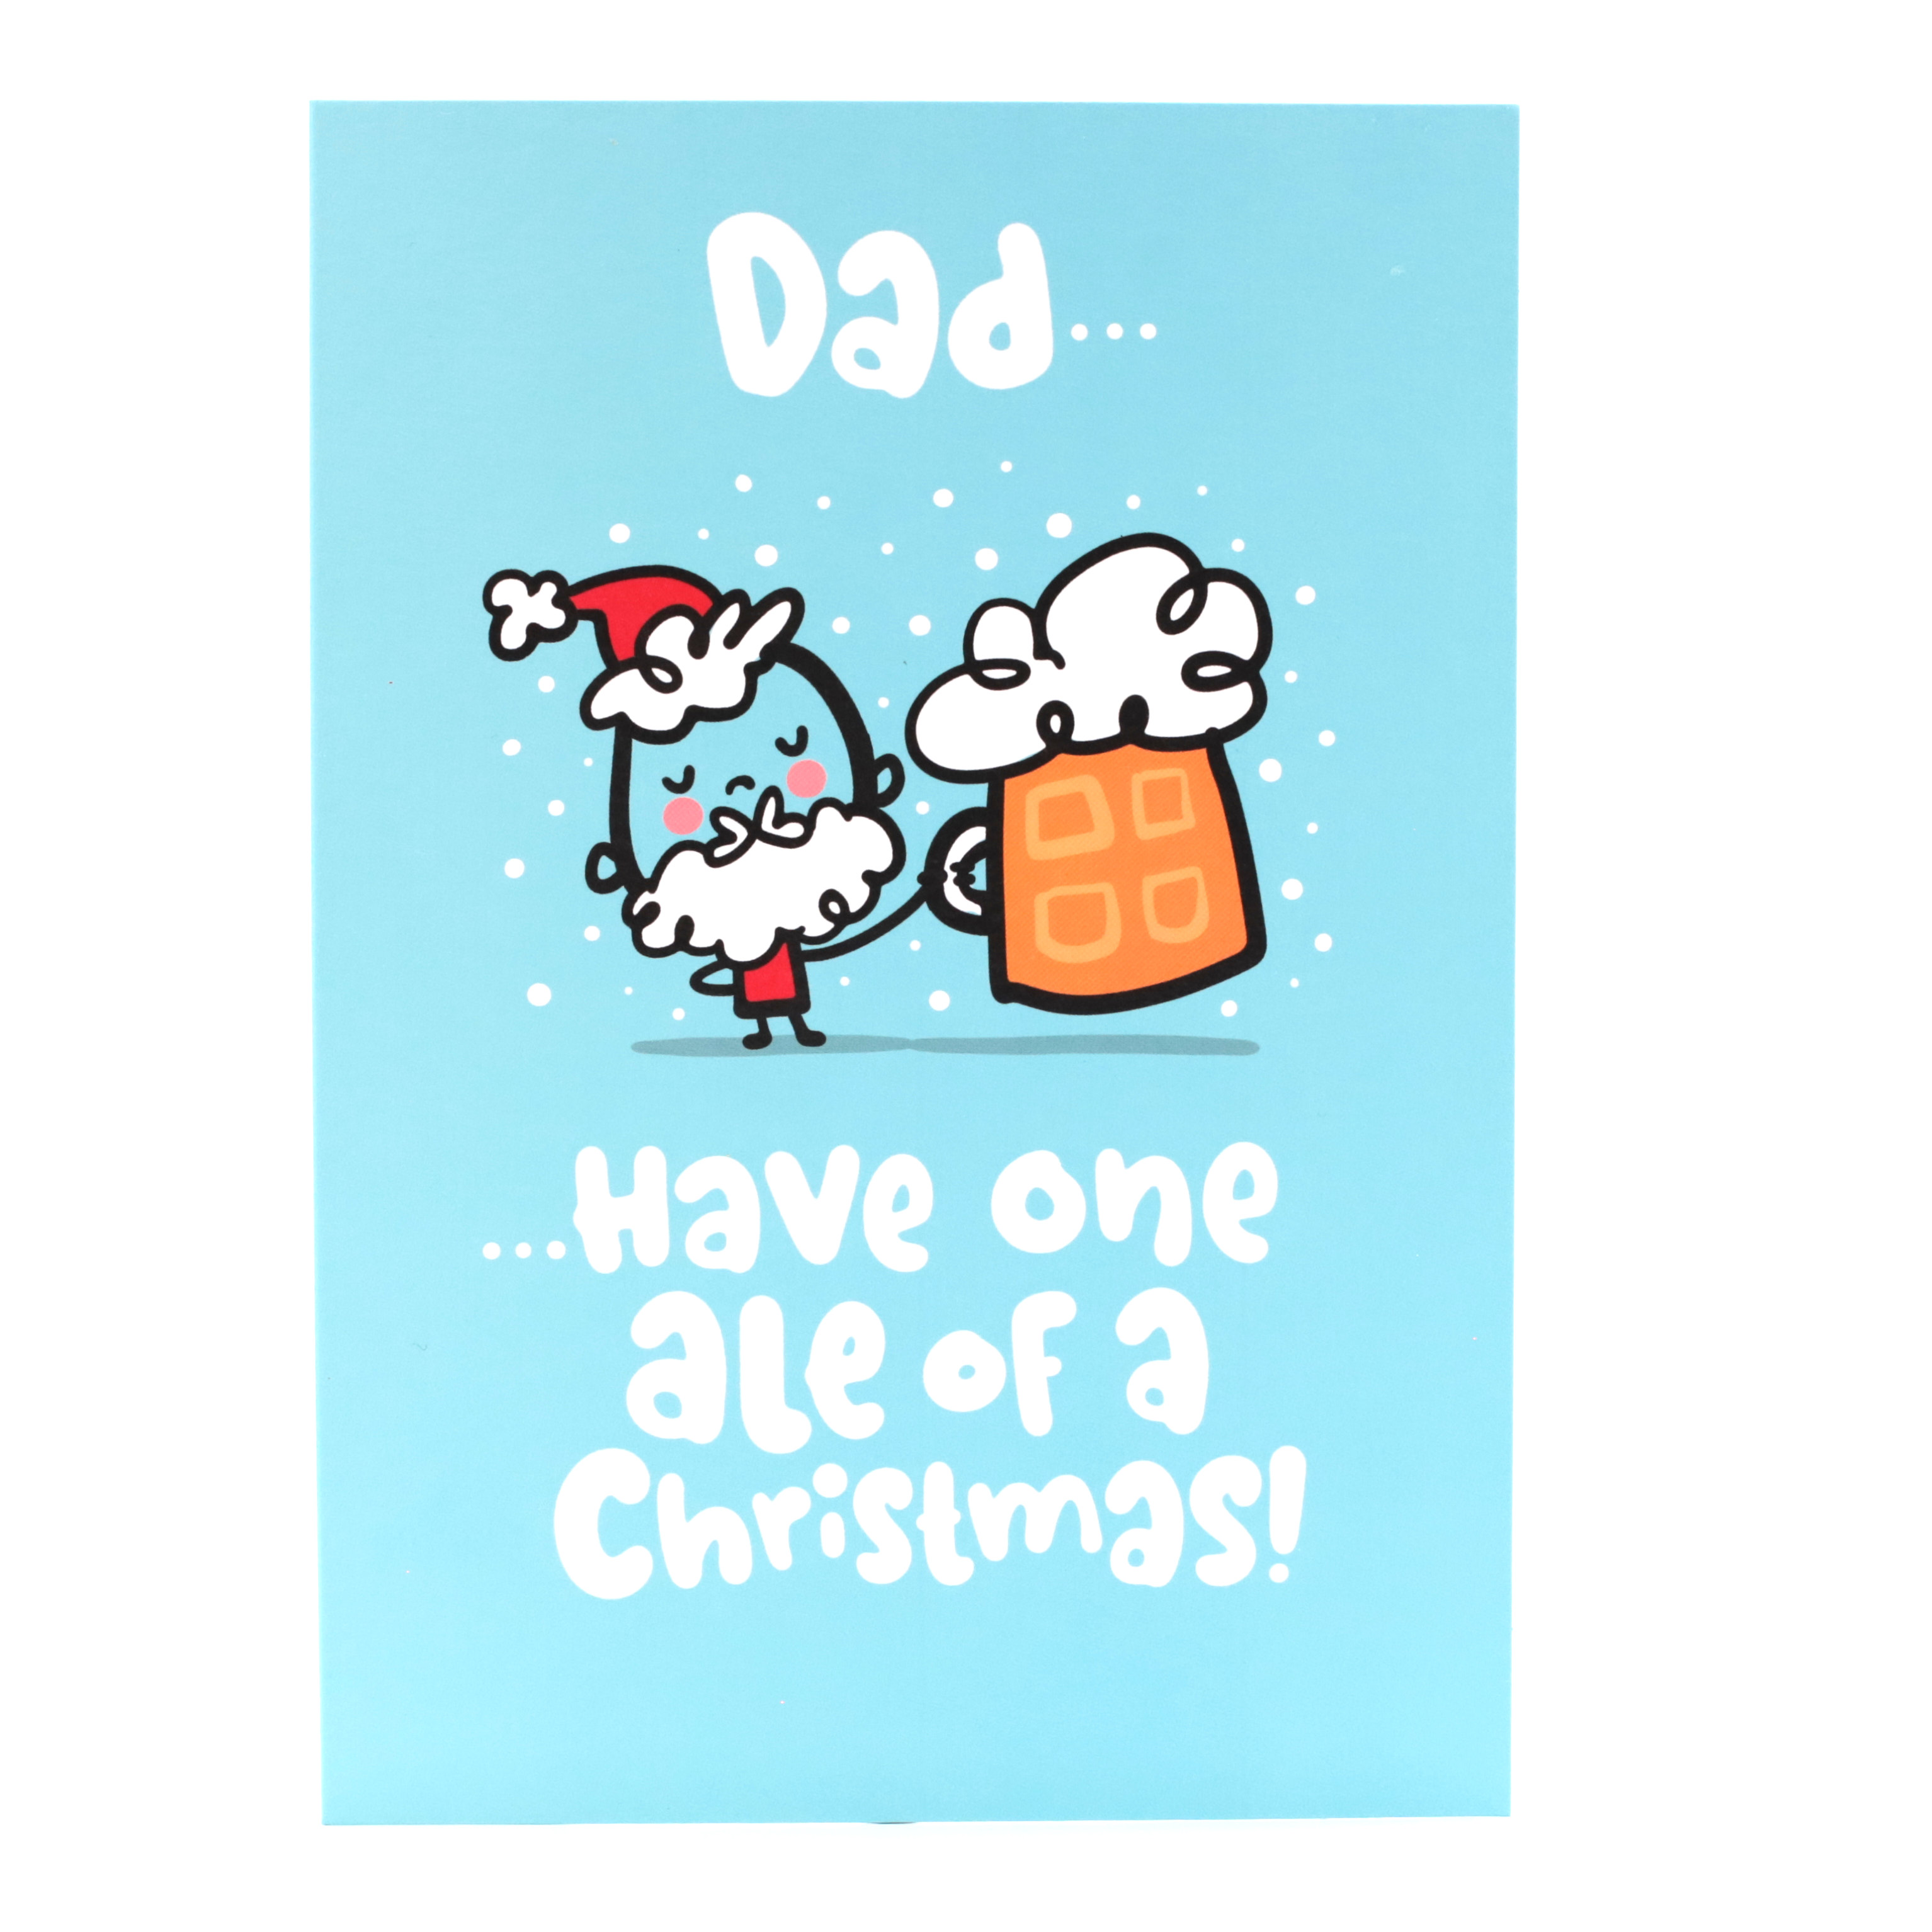 Fruitloops Christmas Card - Dad, One Ale Of A Christmas